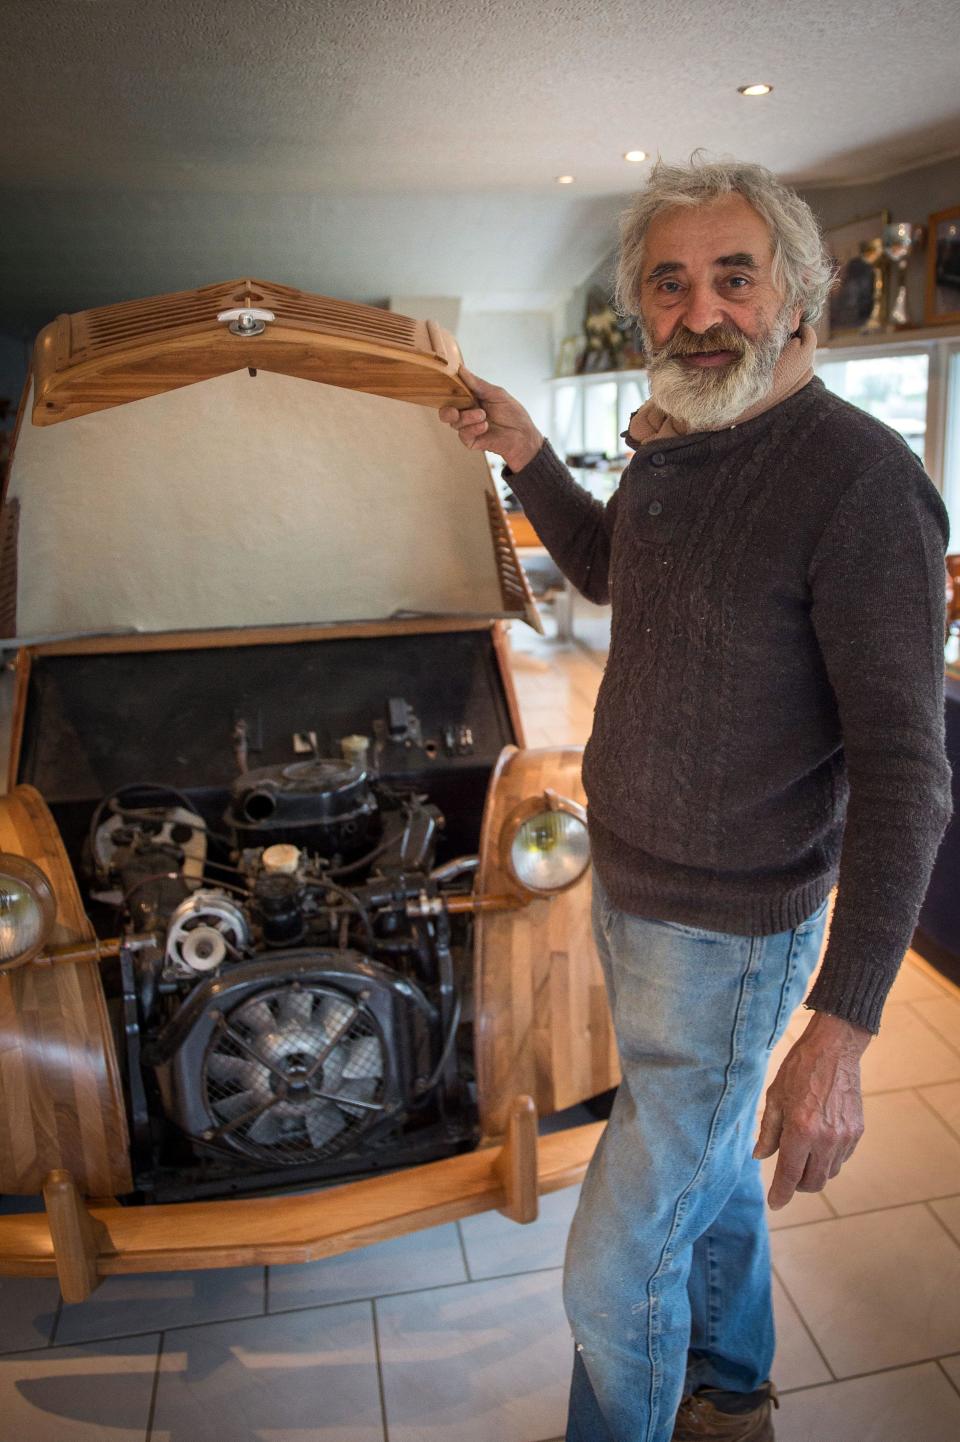 French cabinetmaker Michel Robillard shows the details of his handbuilt wooden Citroen   2CV car, built as an exact replica, March 20, 2017, near Loches, France. / Credit: GUILLAUME SOUVANT/AFP/Getty